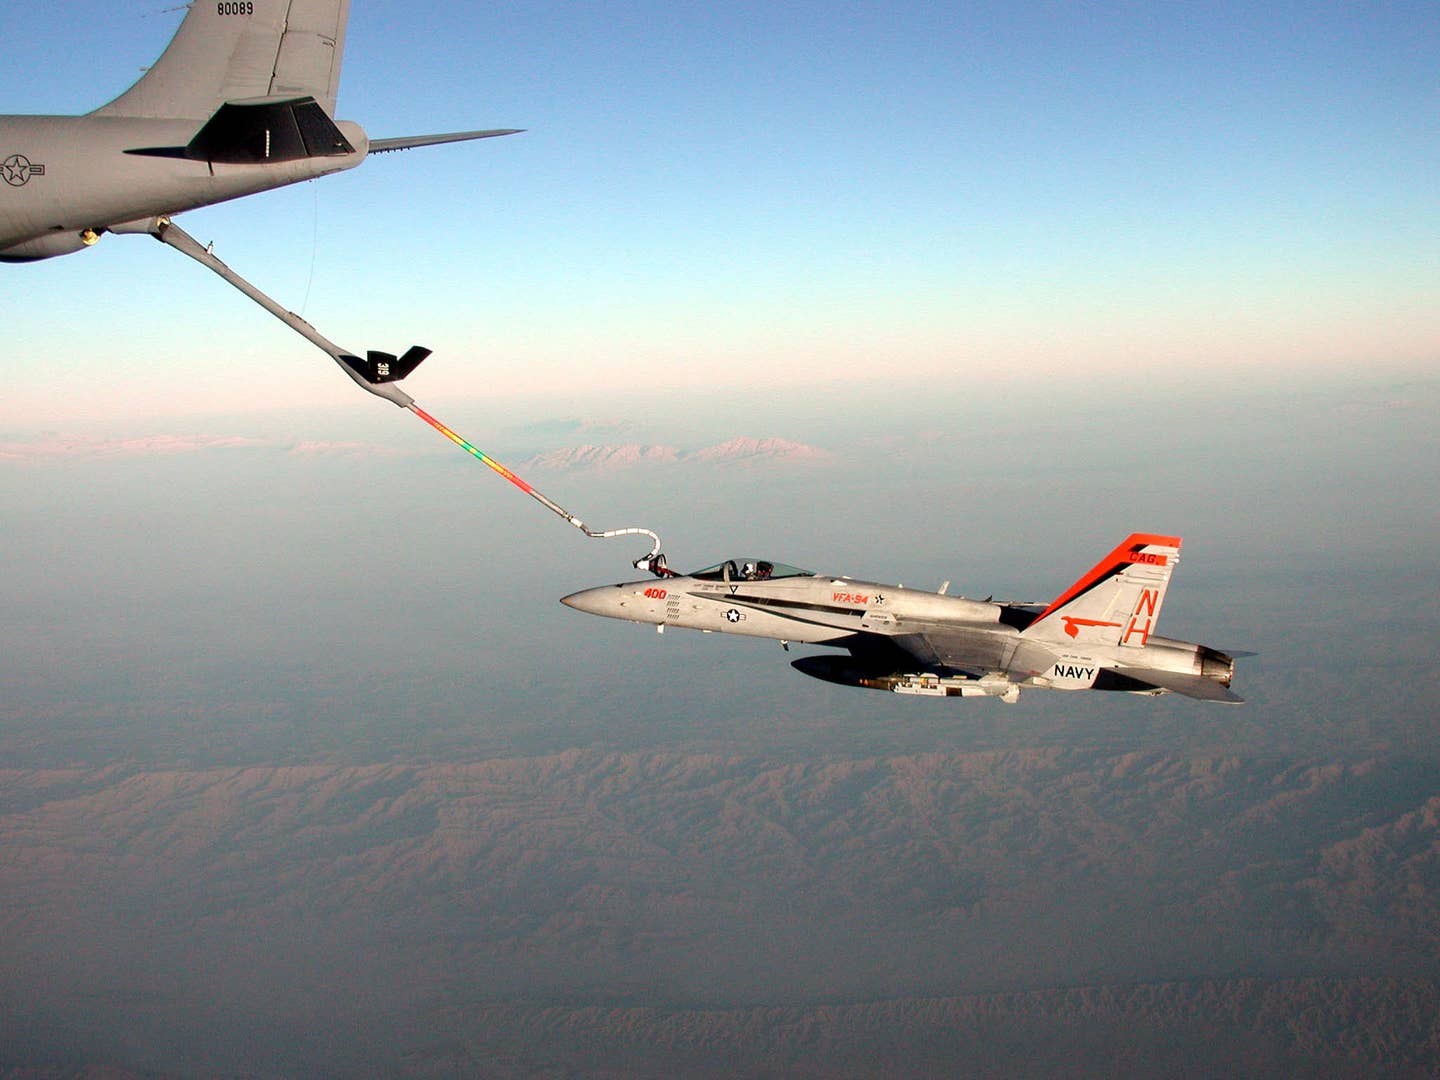 A U.S. Navy F/A-18C Hornet fighter uses a boom-drogue adapter kit to receive fuel from a U.S. Air Force KC-135 tanker. <em>Photo by Mai/Getty Images</em>